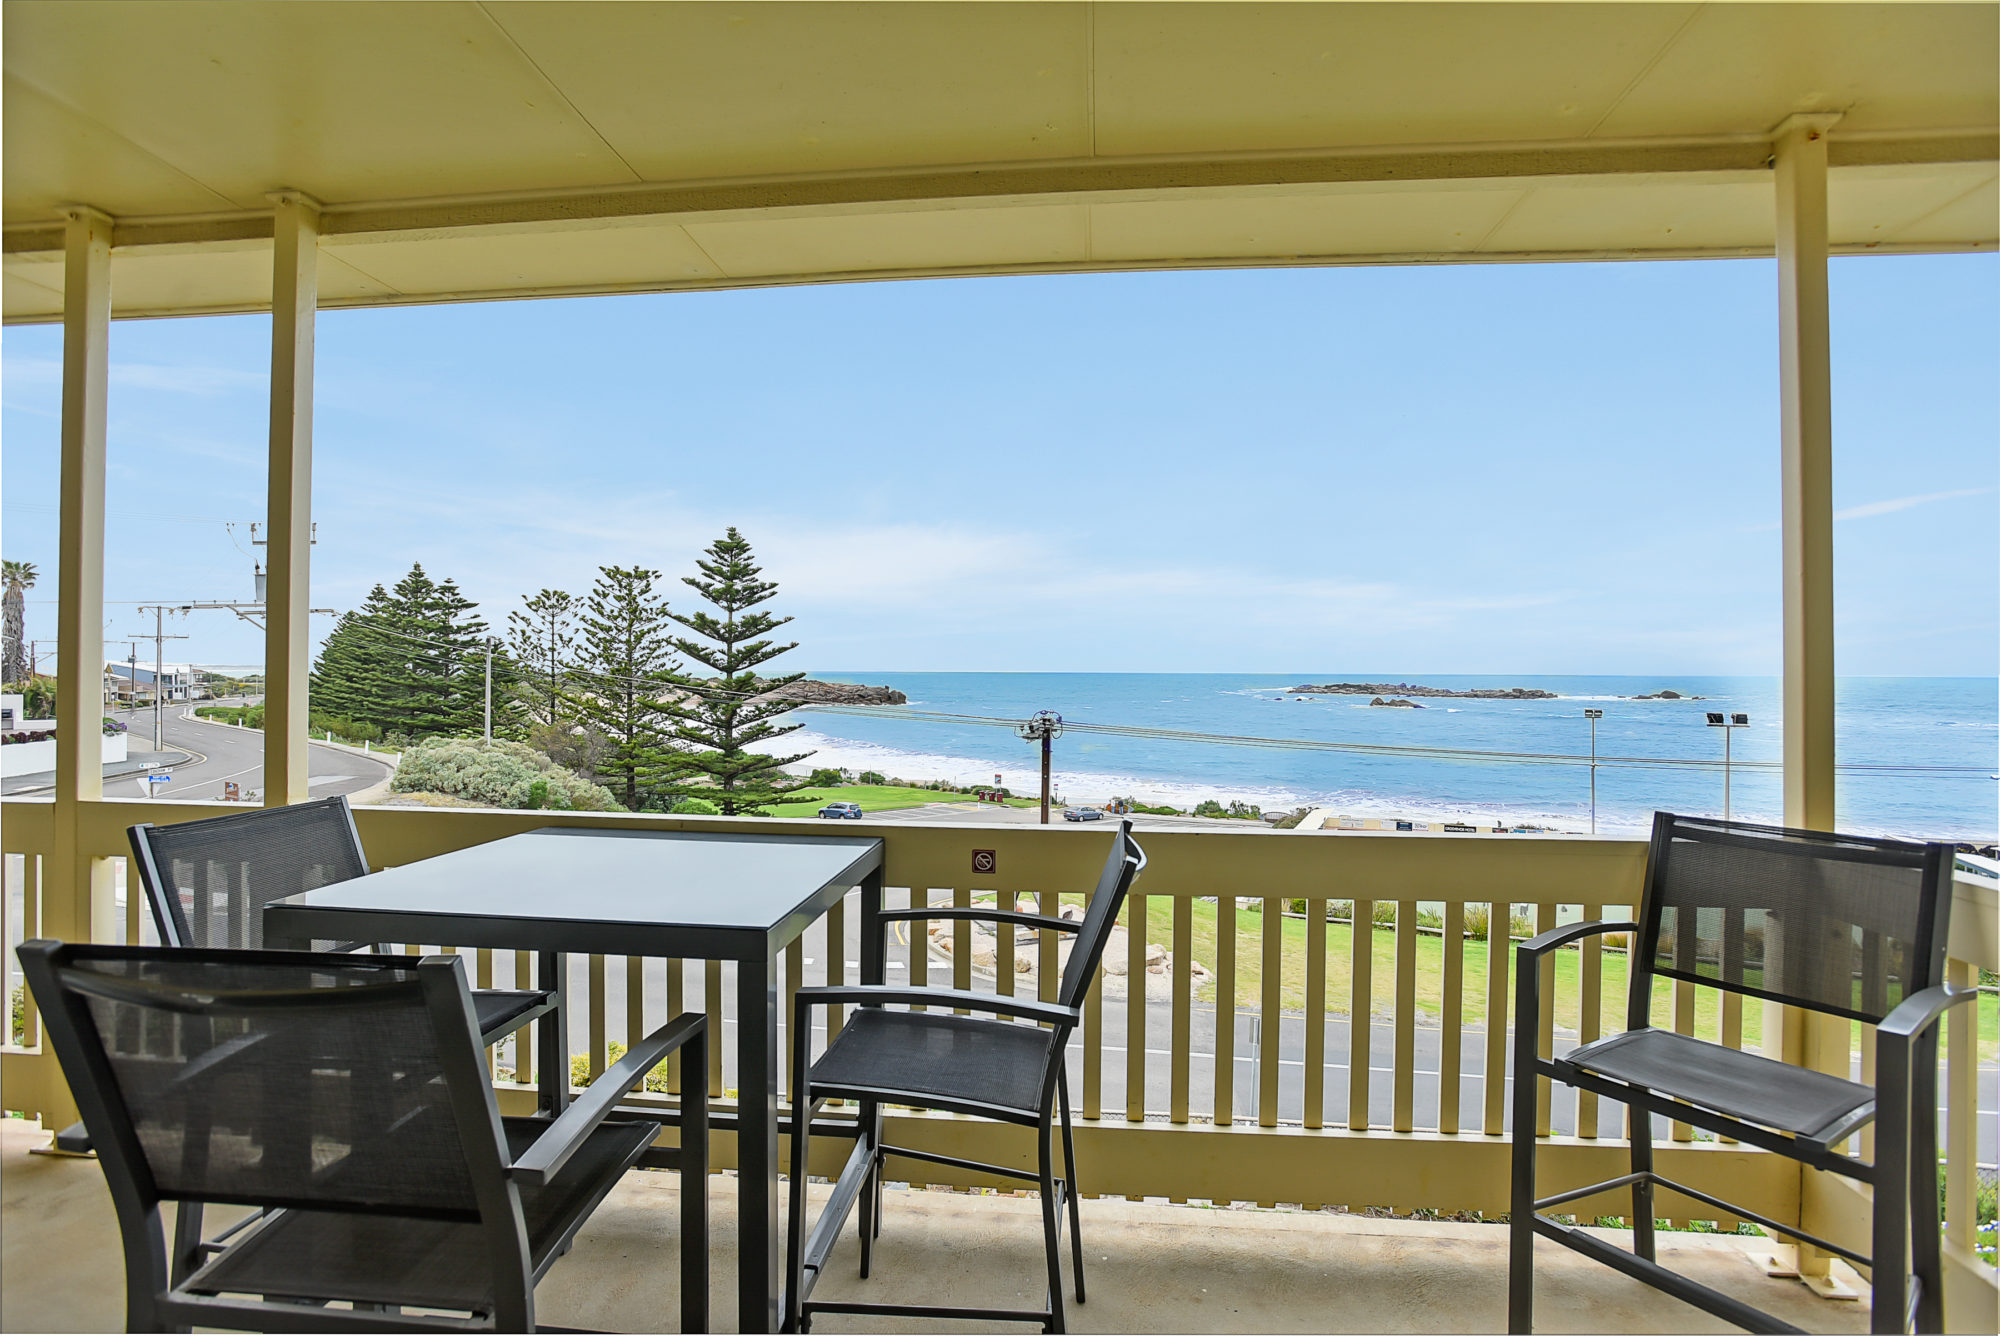 Dolphins Beachfront Apartment no 7 - 'A View To Remember'